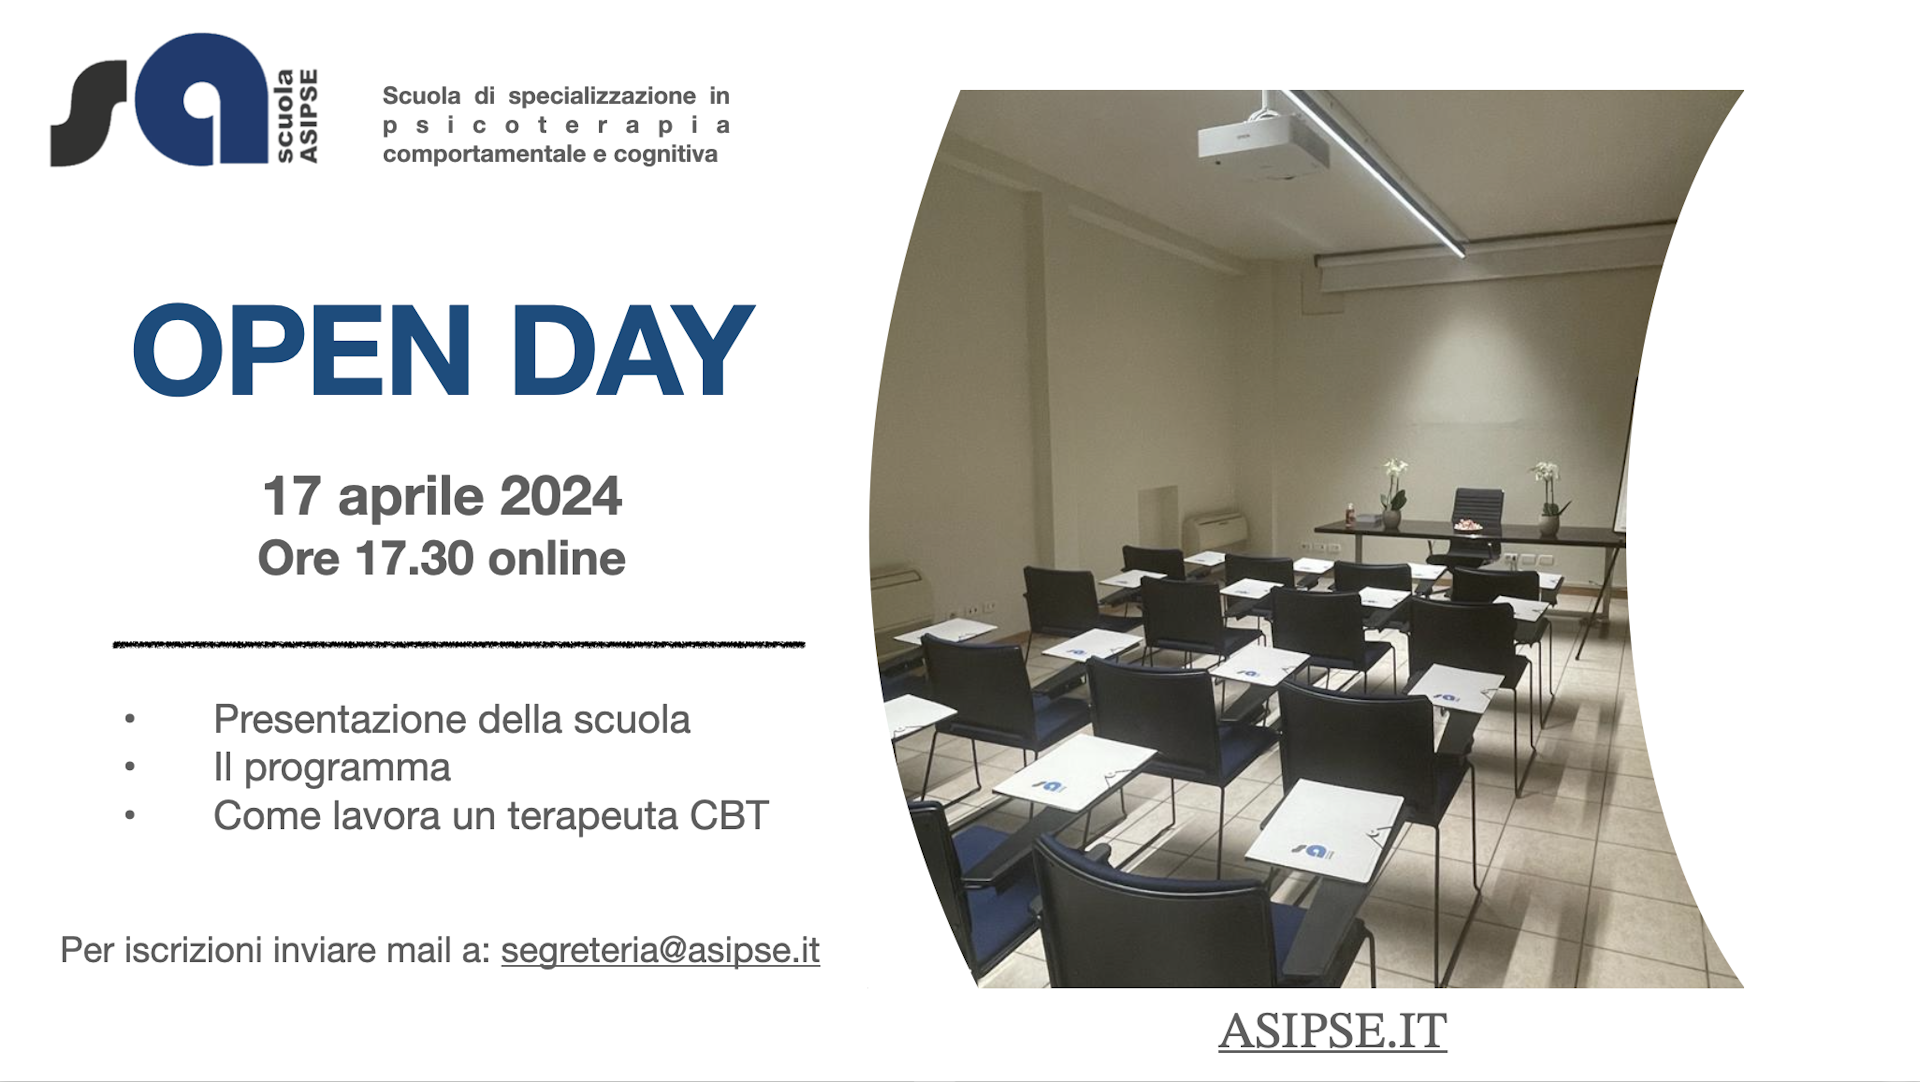 OPEN DAY ASIPSE